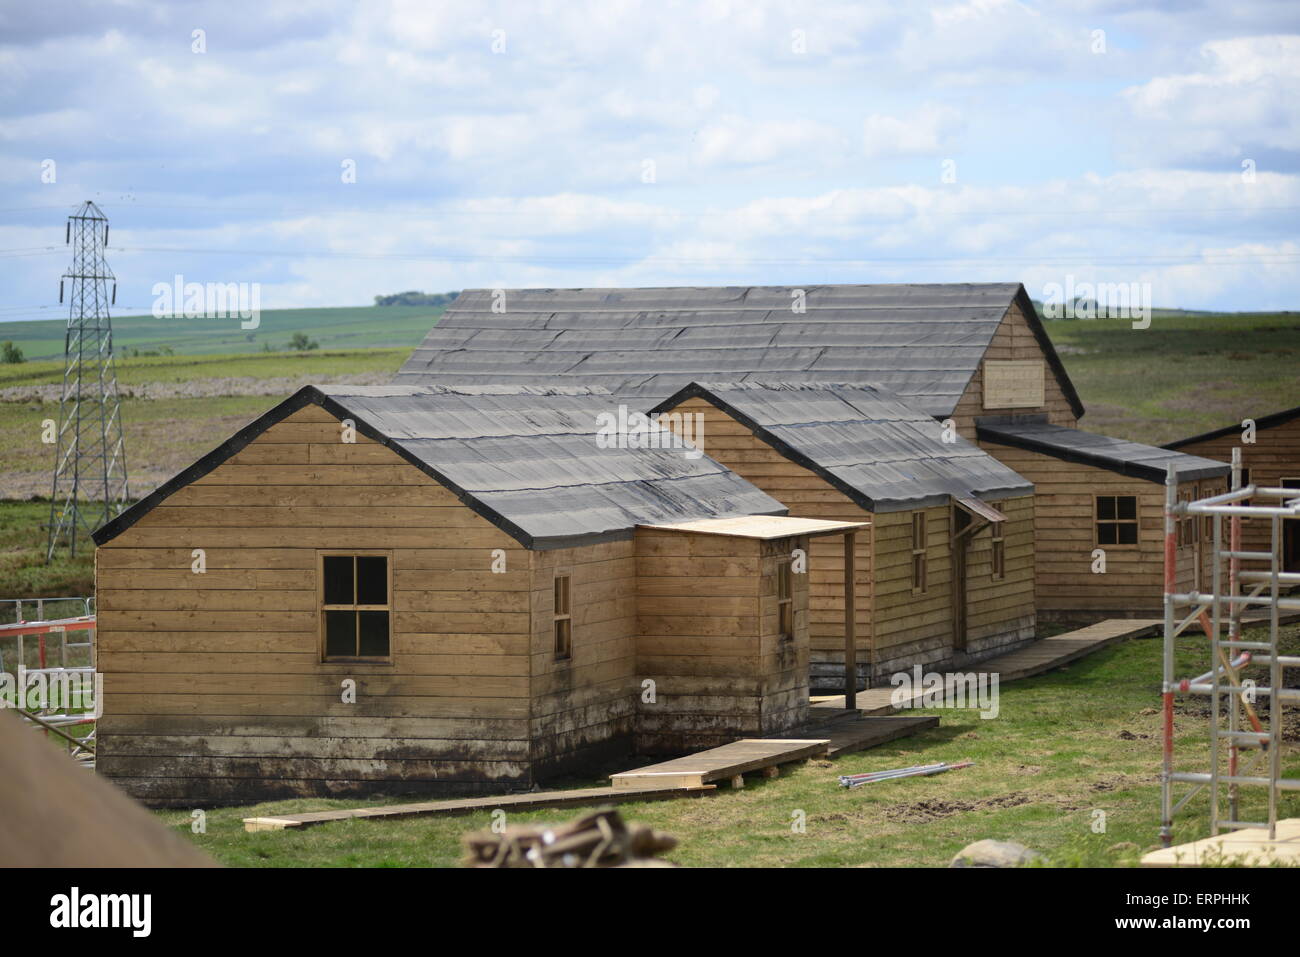 The film set which is currently being built for ITV drama 'Jericho'. Picture: Scott Bairstow/Alamy Stock Photo